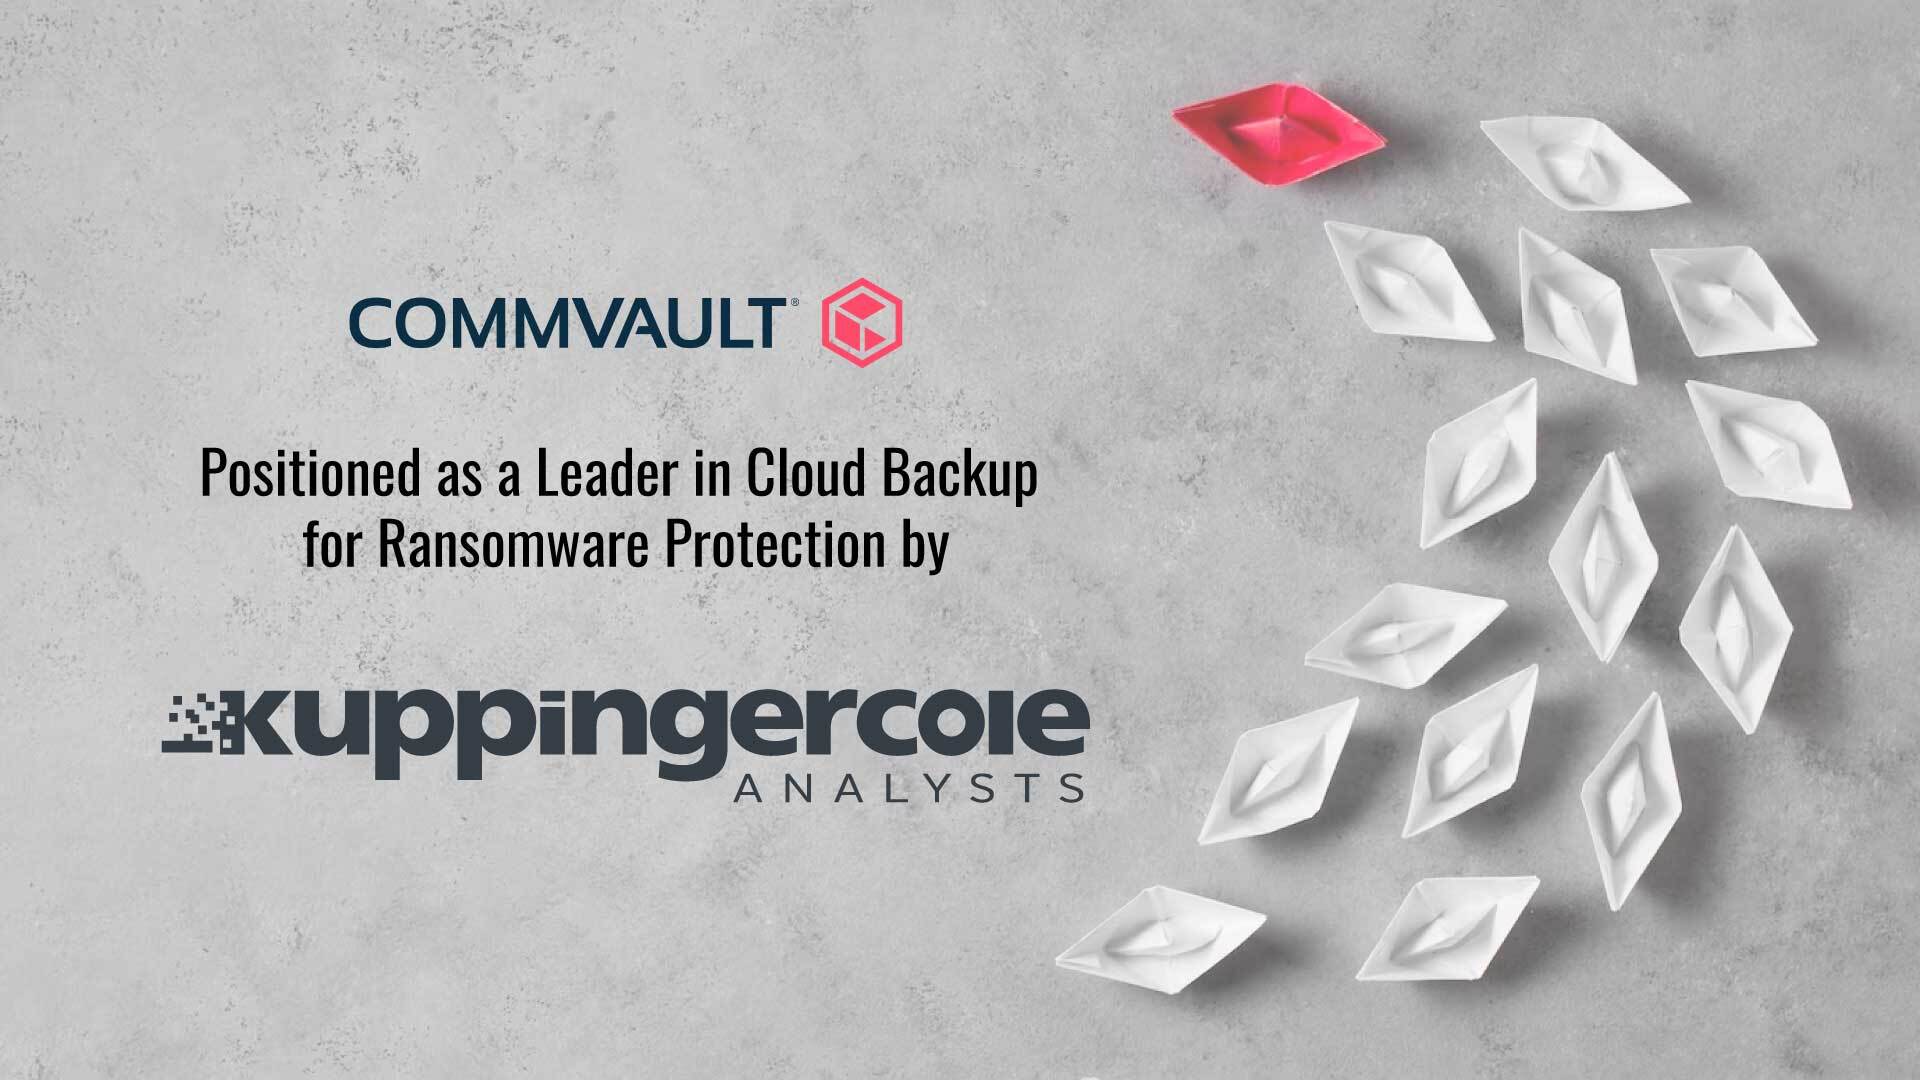 Commvault a Leader in Cloud Backup for Ransomware Protection, According to KuppingerCole